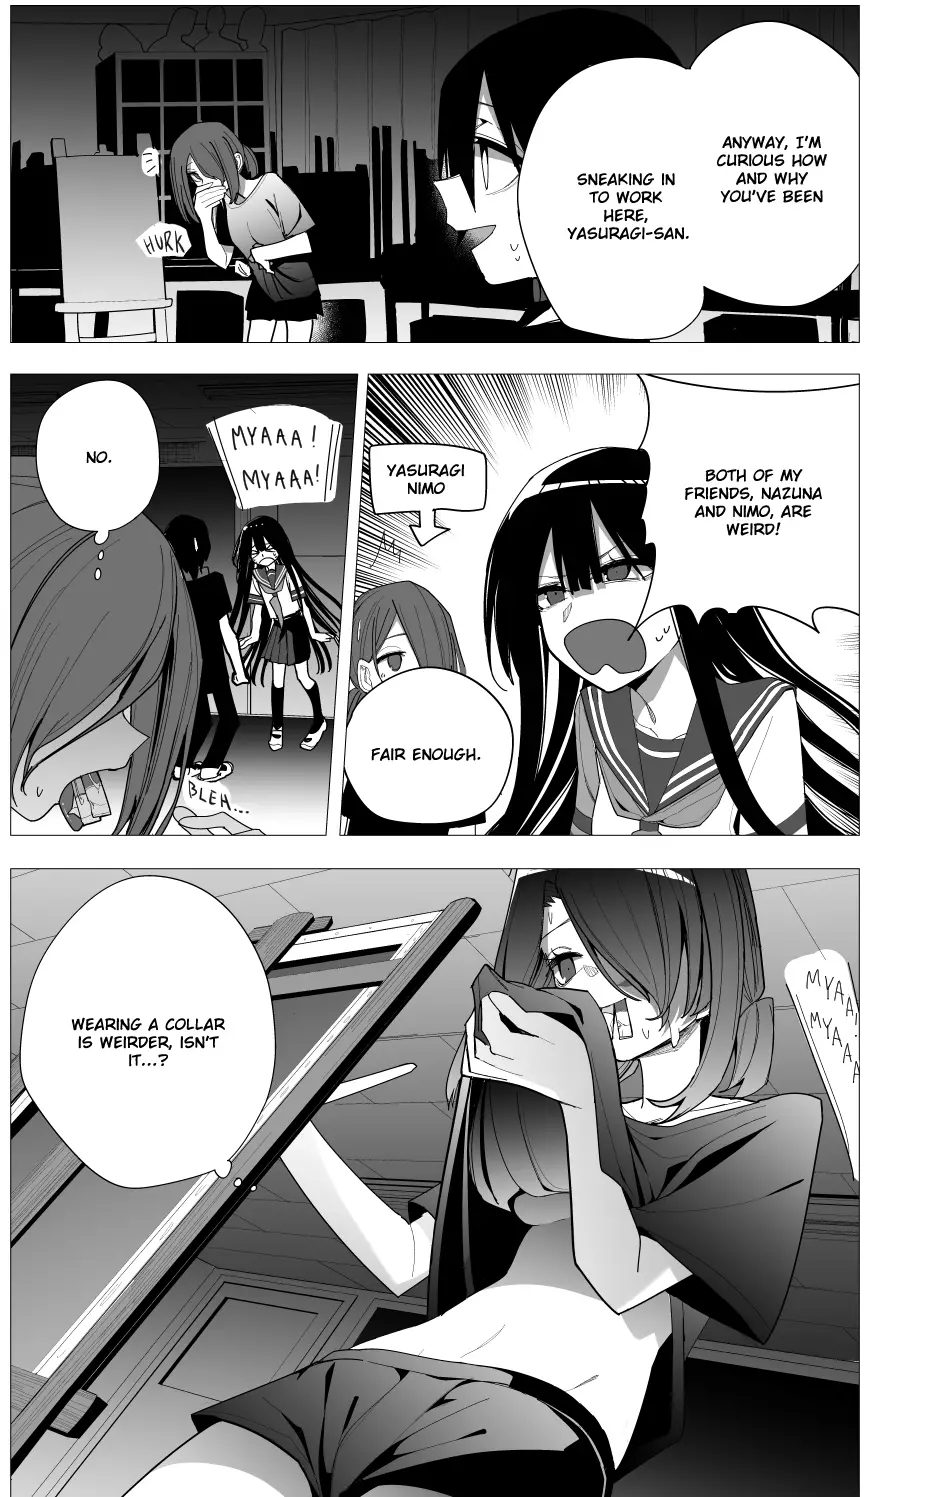 Mitsuishi-San Is Being Weird This Year - 28 page 20-f1942382